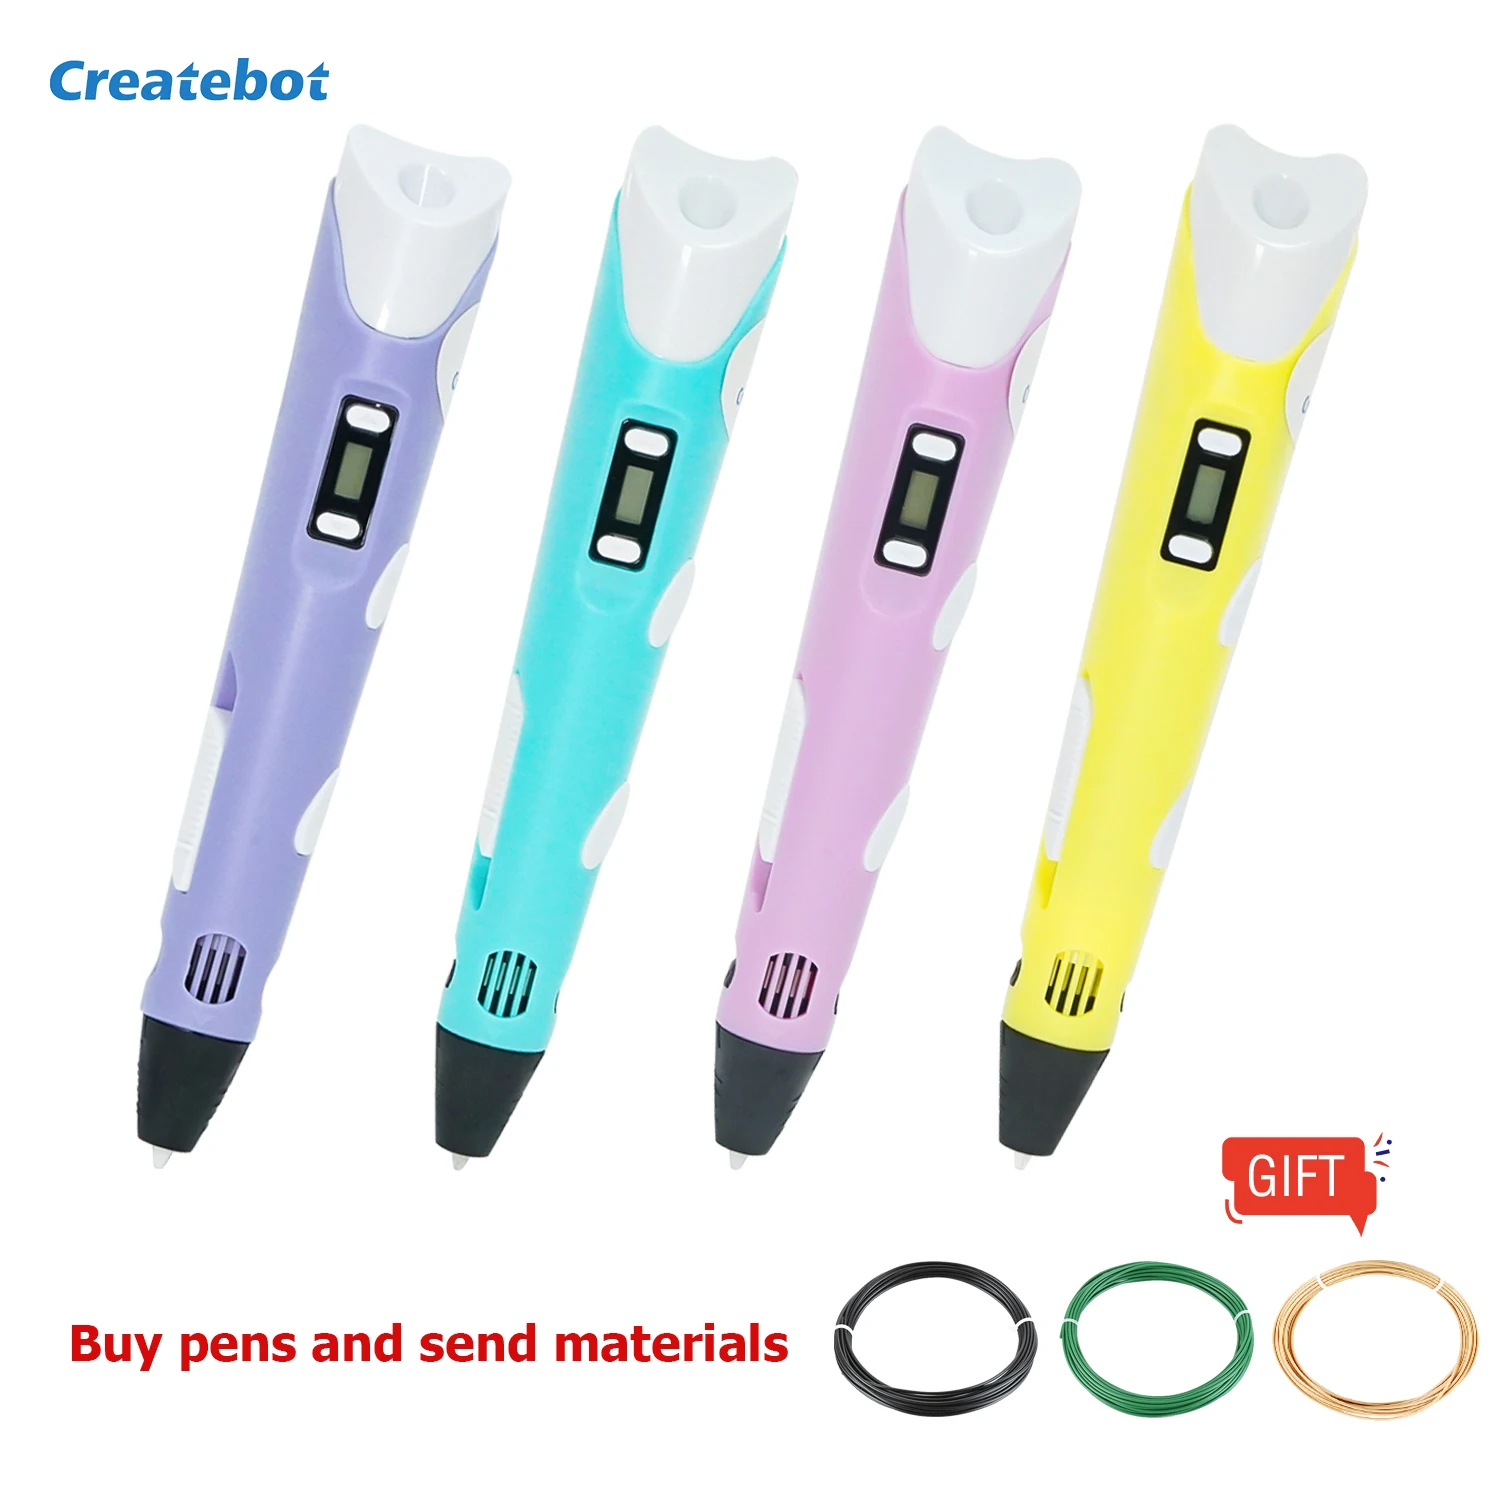 https://ae01.alicdn.com/kf/S342ad00fa8ba493f895de9b23add10854/Createbot-3D-Pen-Drawing-Pen-With-LCD-Screen-Compatible-PLA-Toys-Safe-3d-pen-for-kids.jpg